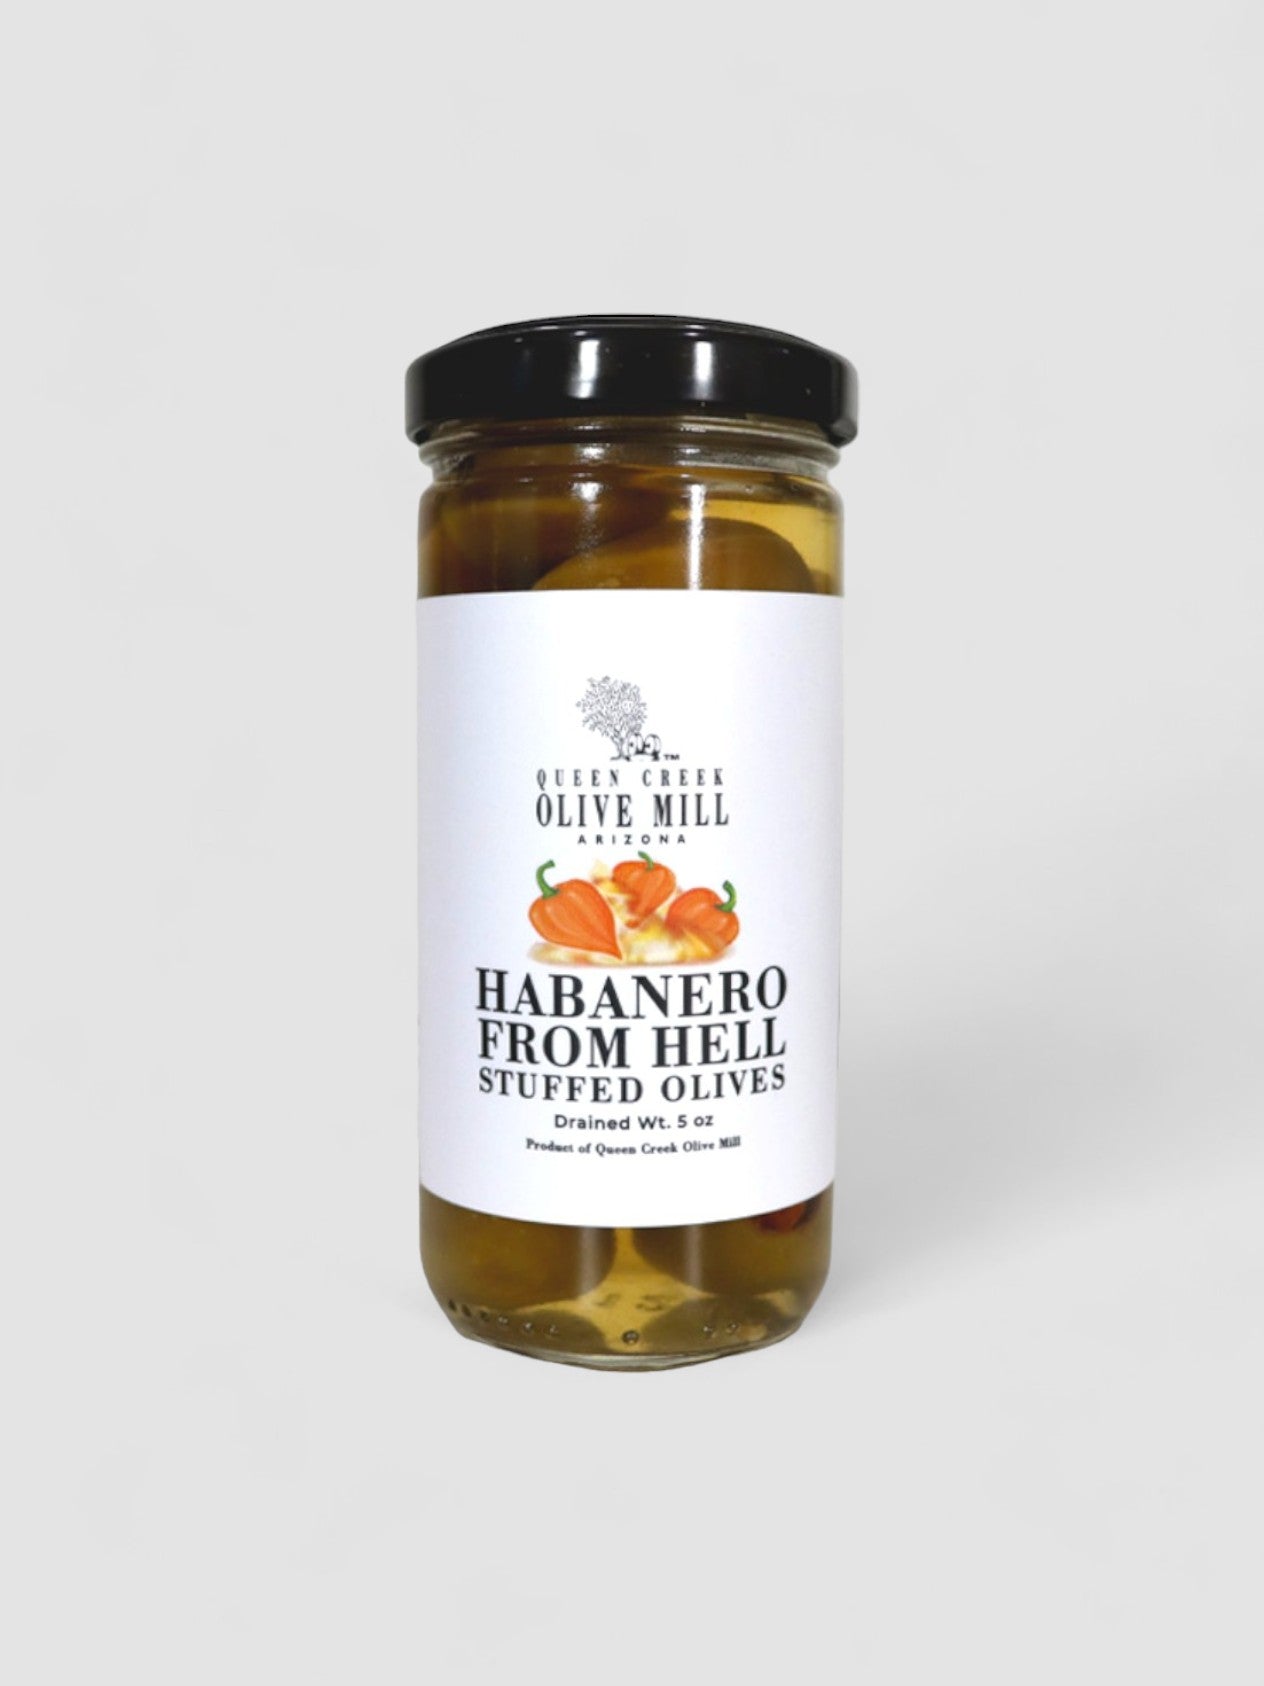 HABANERO FROM HELL STUFFED OLIVES